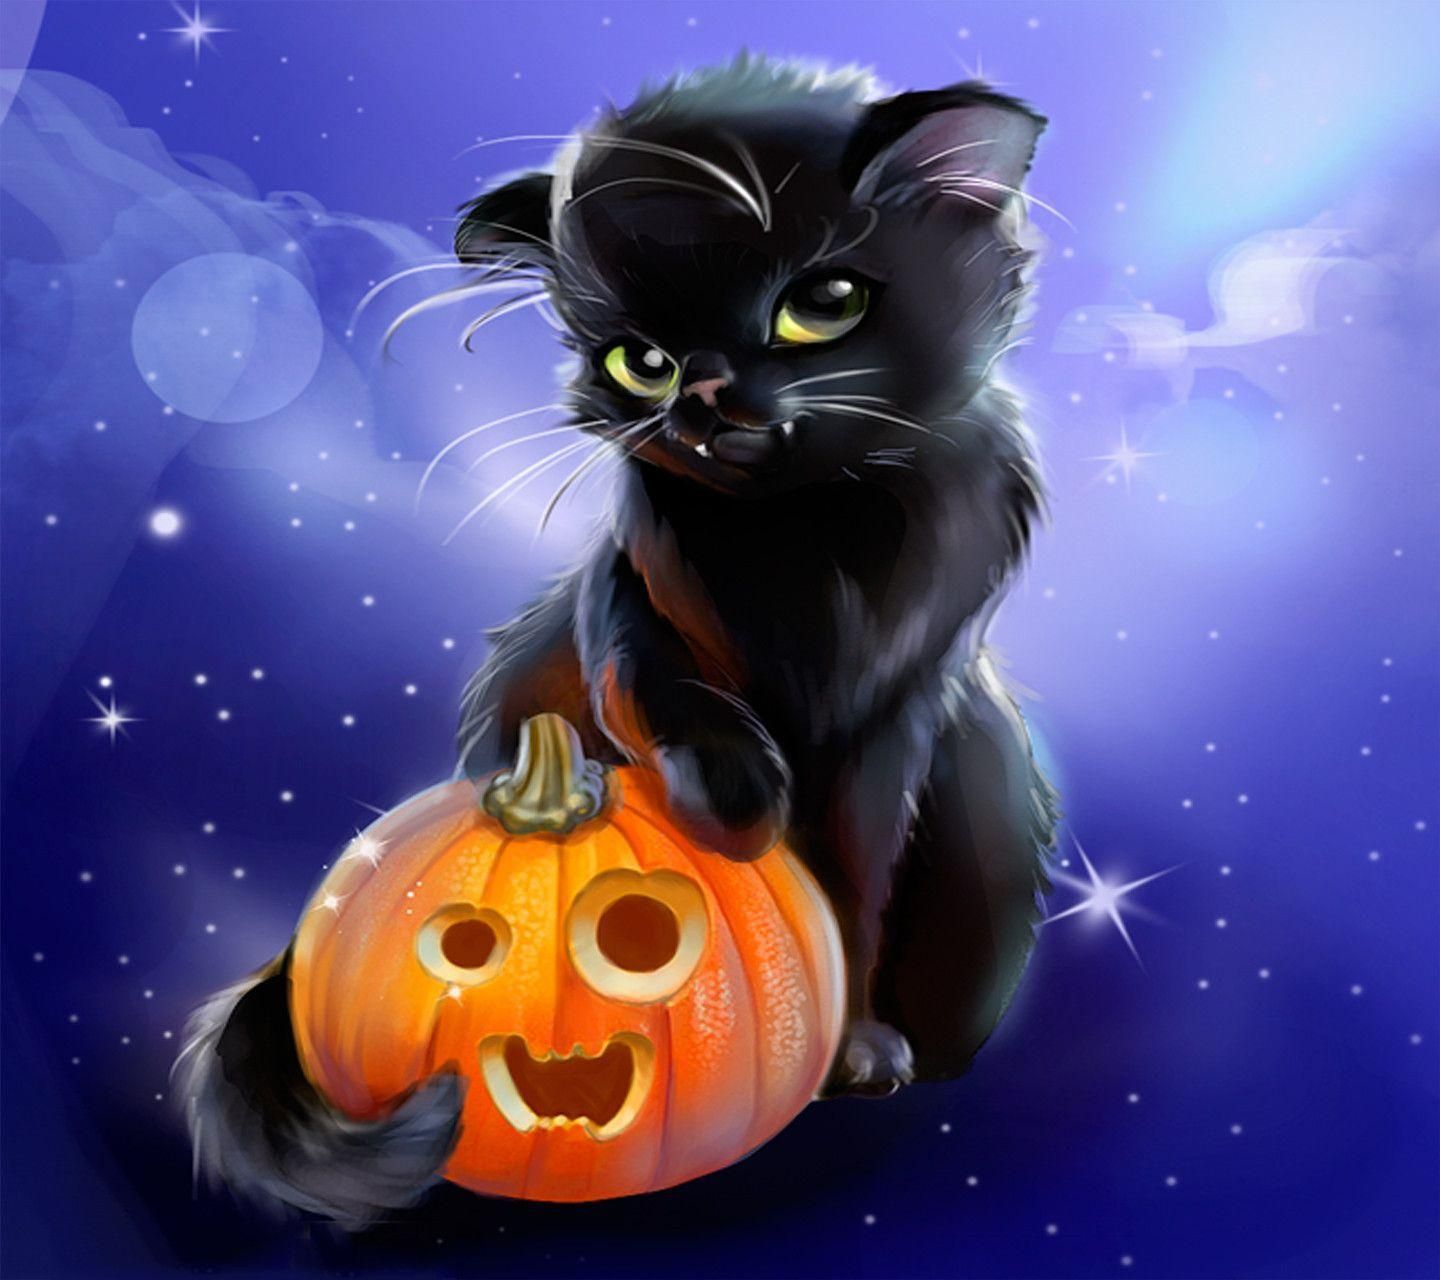 Cat Wallpaper For Halloween 2020 (High Quality Resolution). Halloween cat, Halloween funny, Black cat halloween